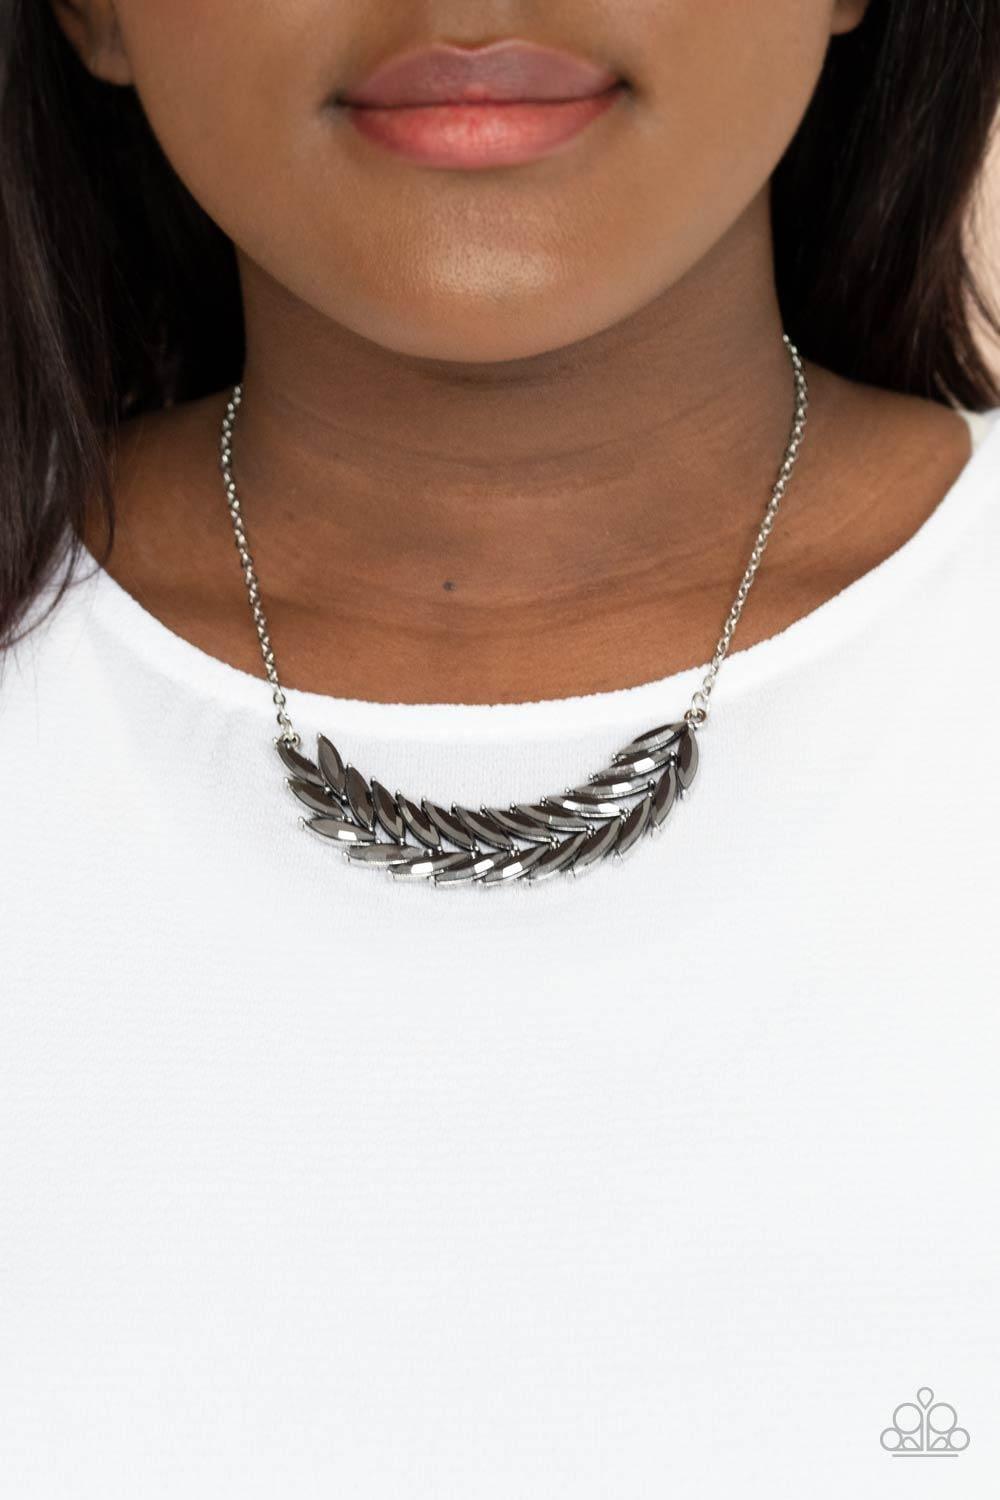 Paparazzi Accessories - Flight Of Fanciness - Silver Necklace - Bling by JessieK